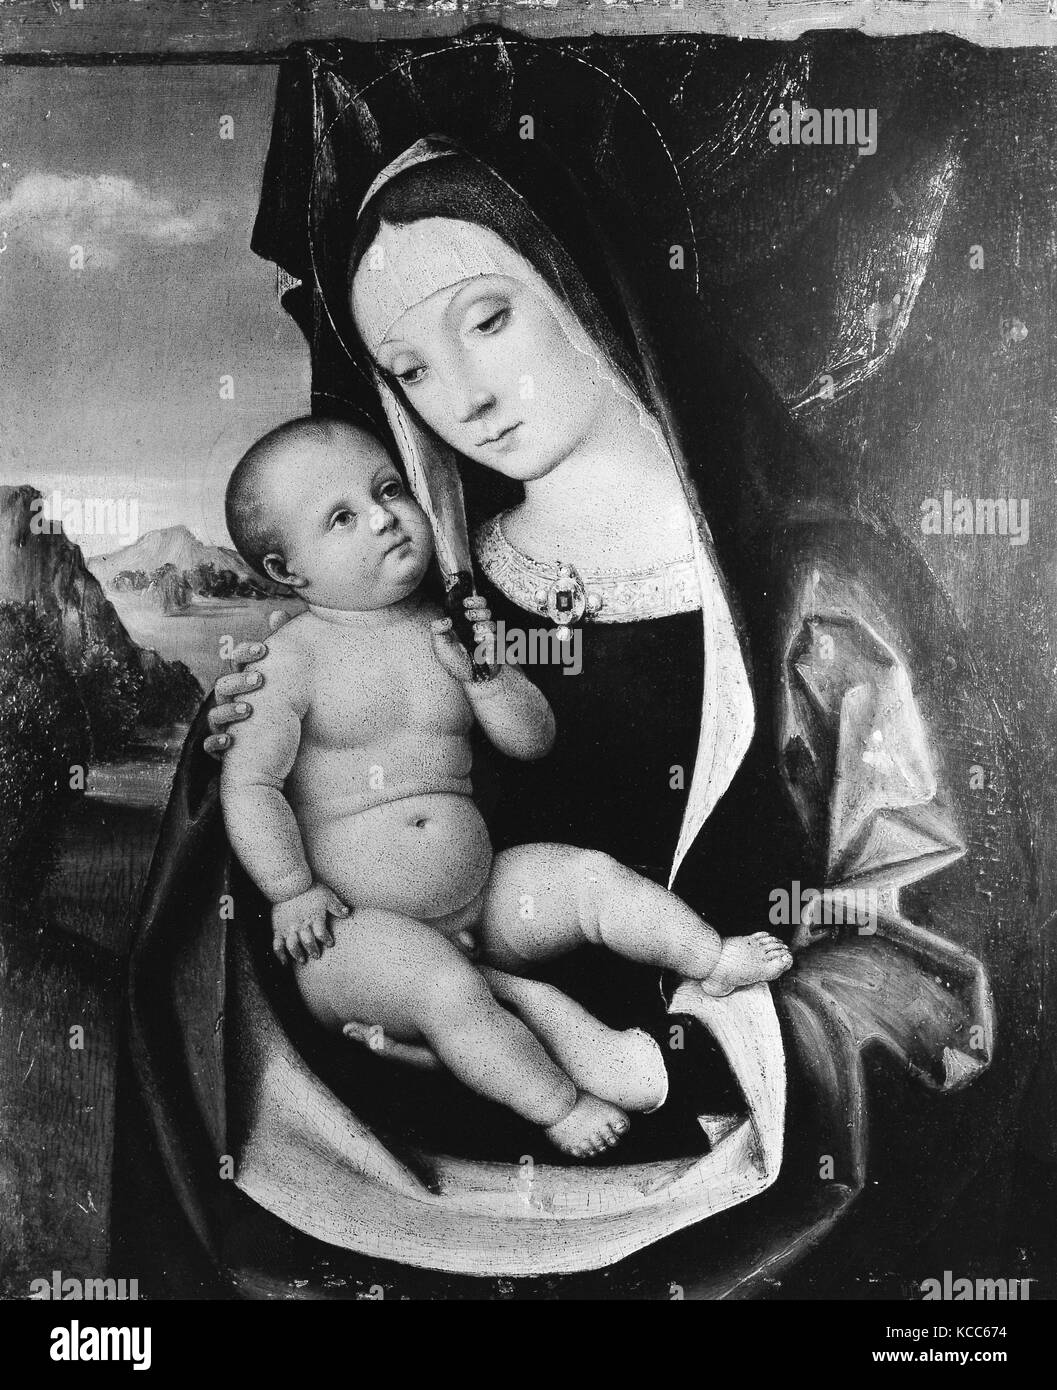 Madonna and Child, Tempera on wood, 15 1/4 x 12 3/8 in. (38.7 x 31.4 cm), Paintings, Ercole Banci (Italian, Bolognese, active Stock Photo